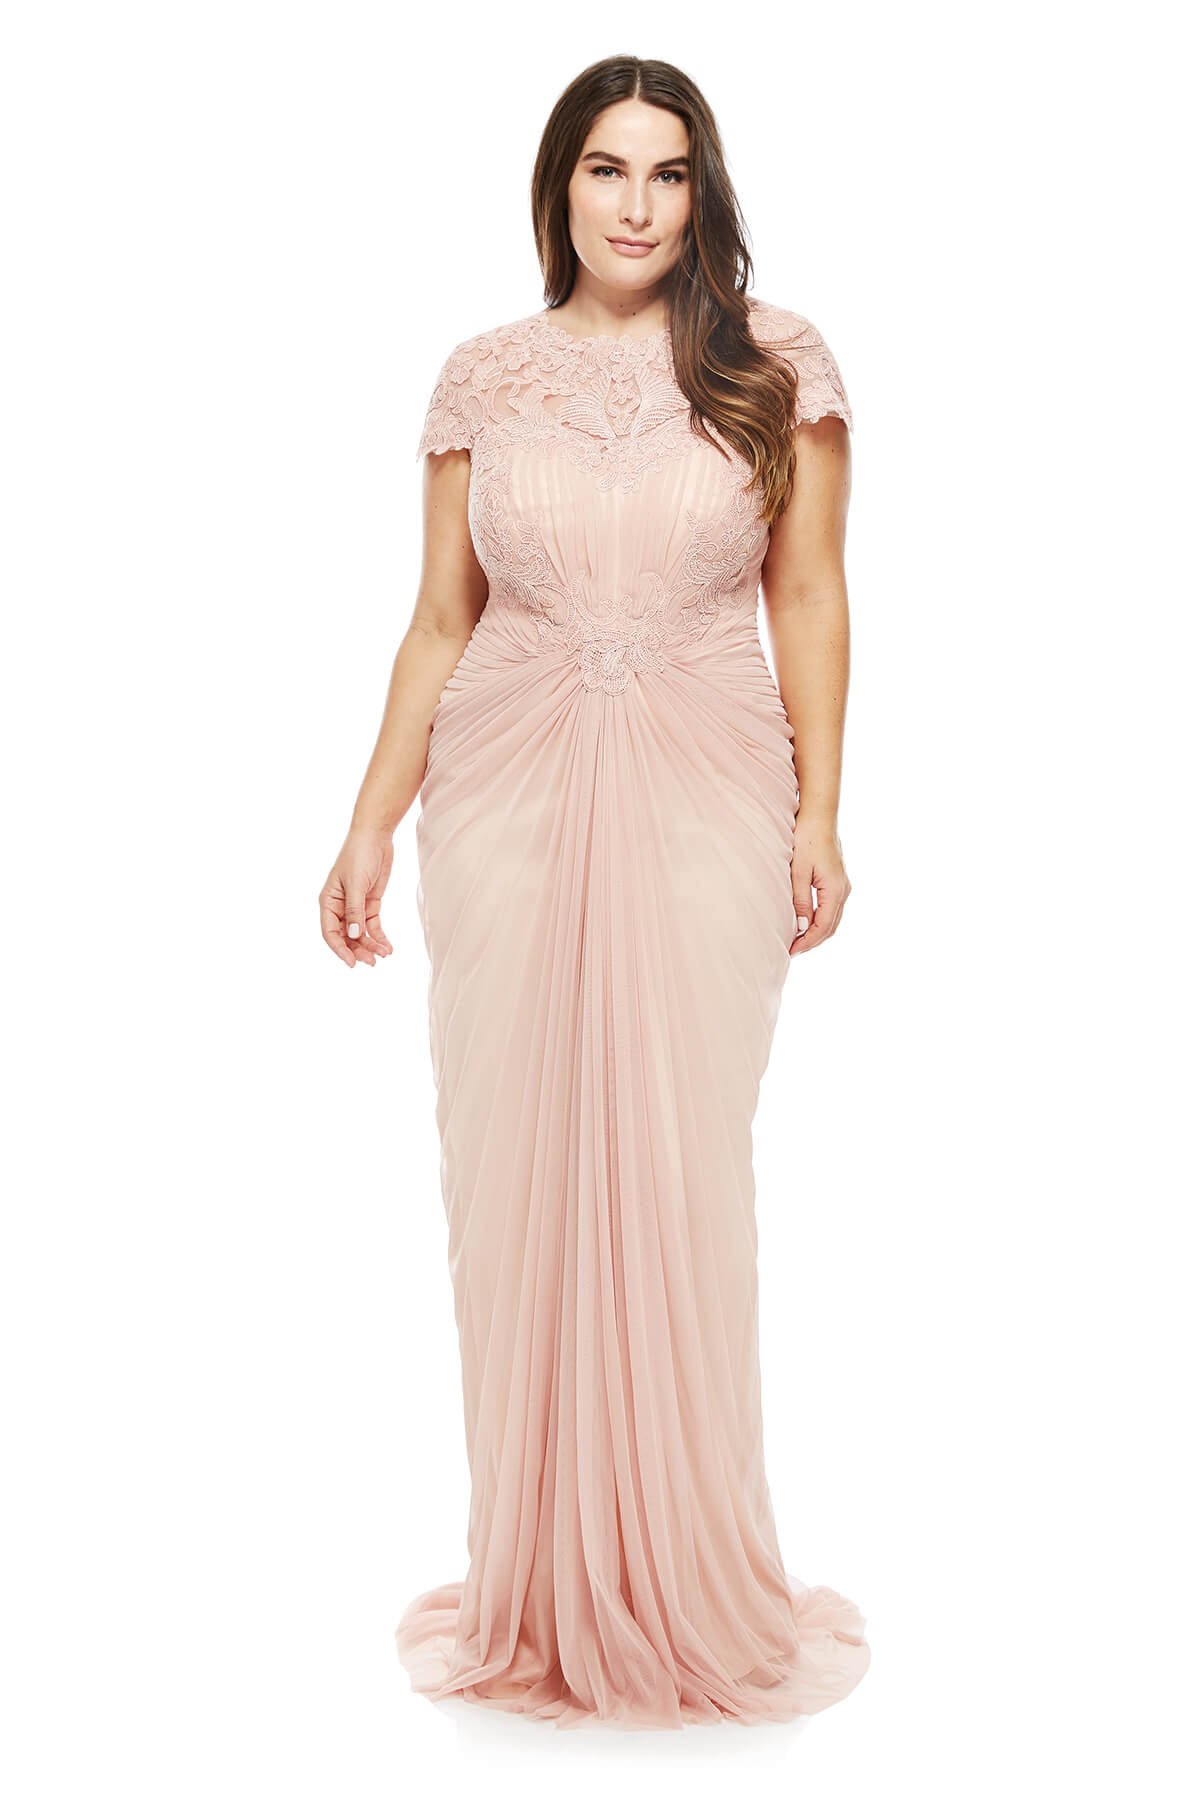 Corded Lace and Draped Tulle Gown - PLUS SIZE